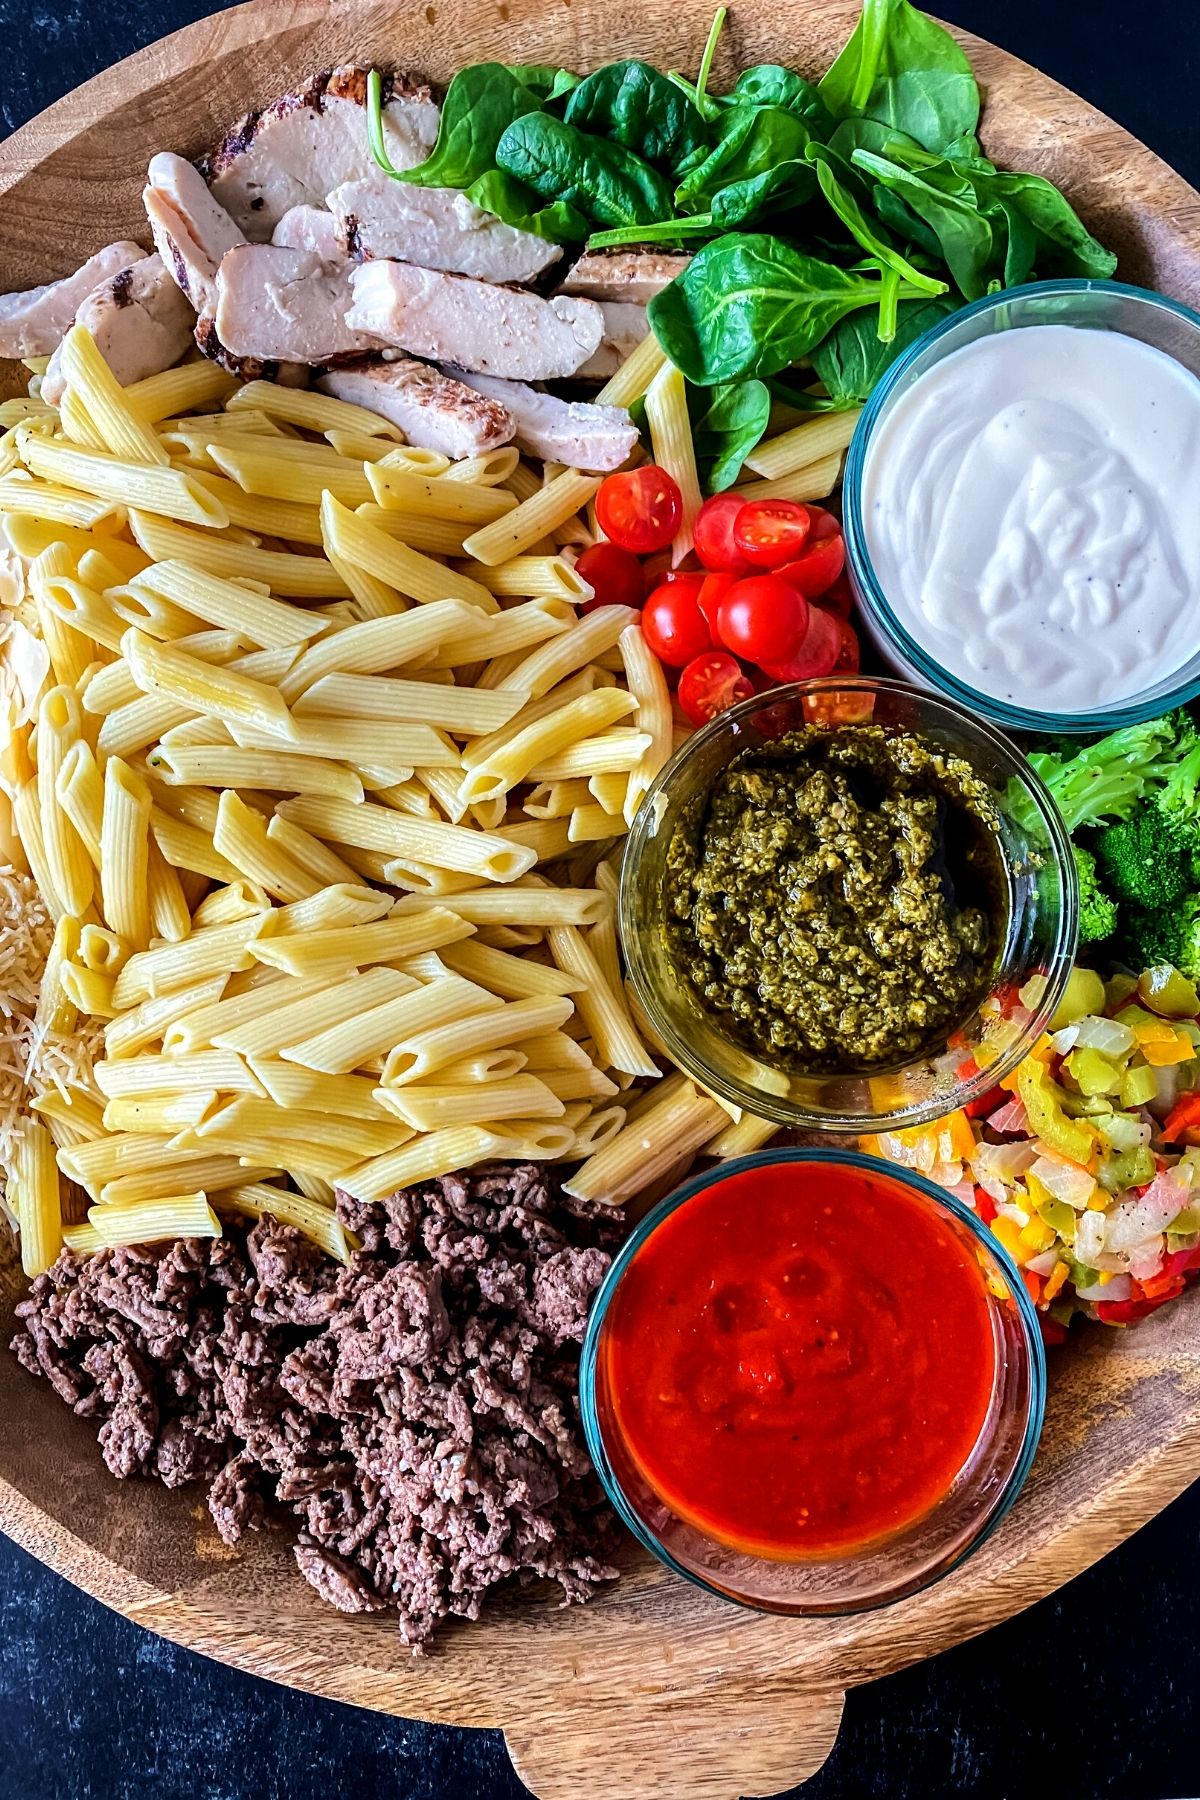 Round wooden tray with pasta and sauces in bowls